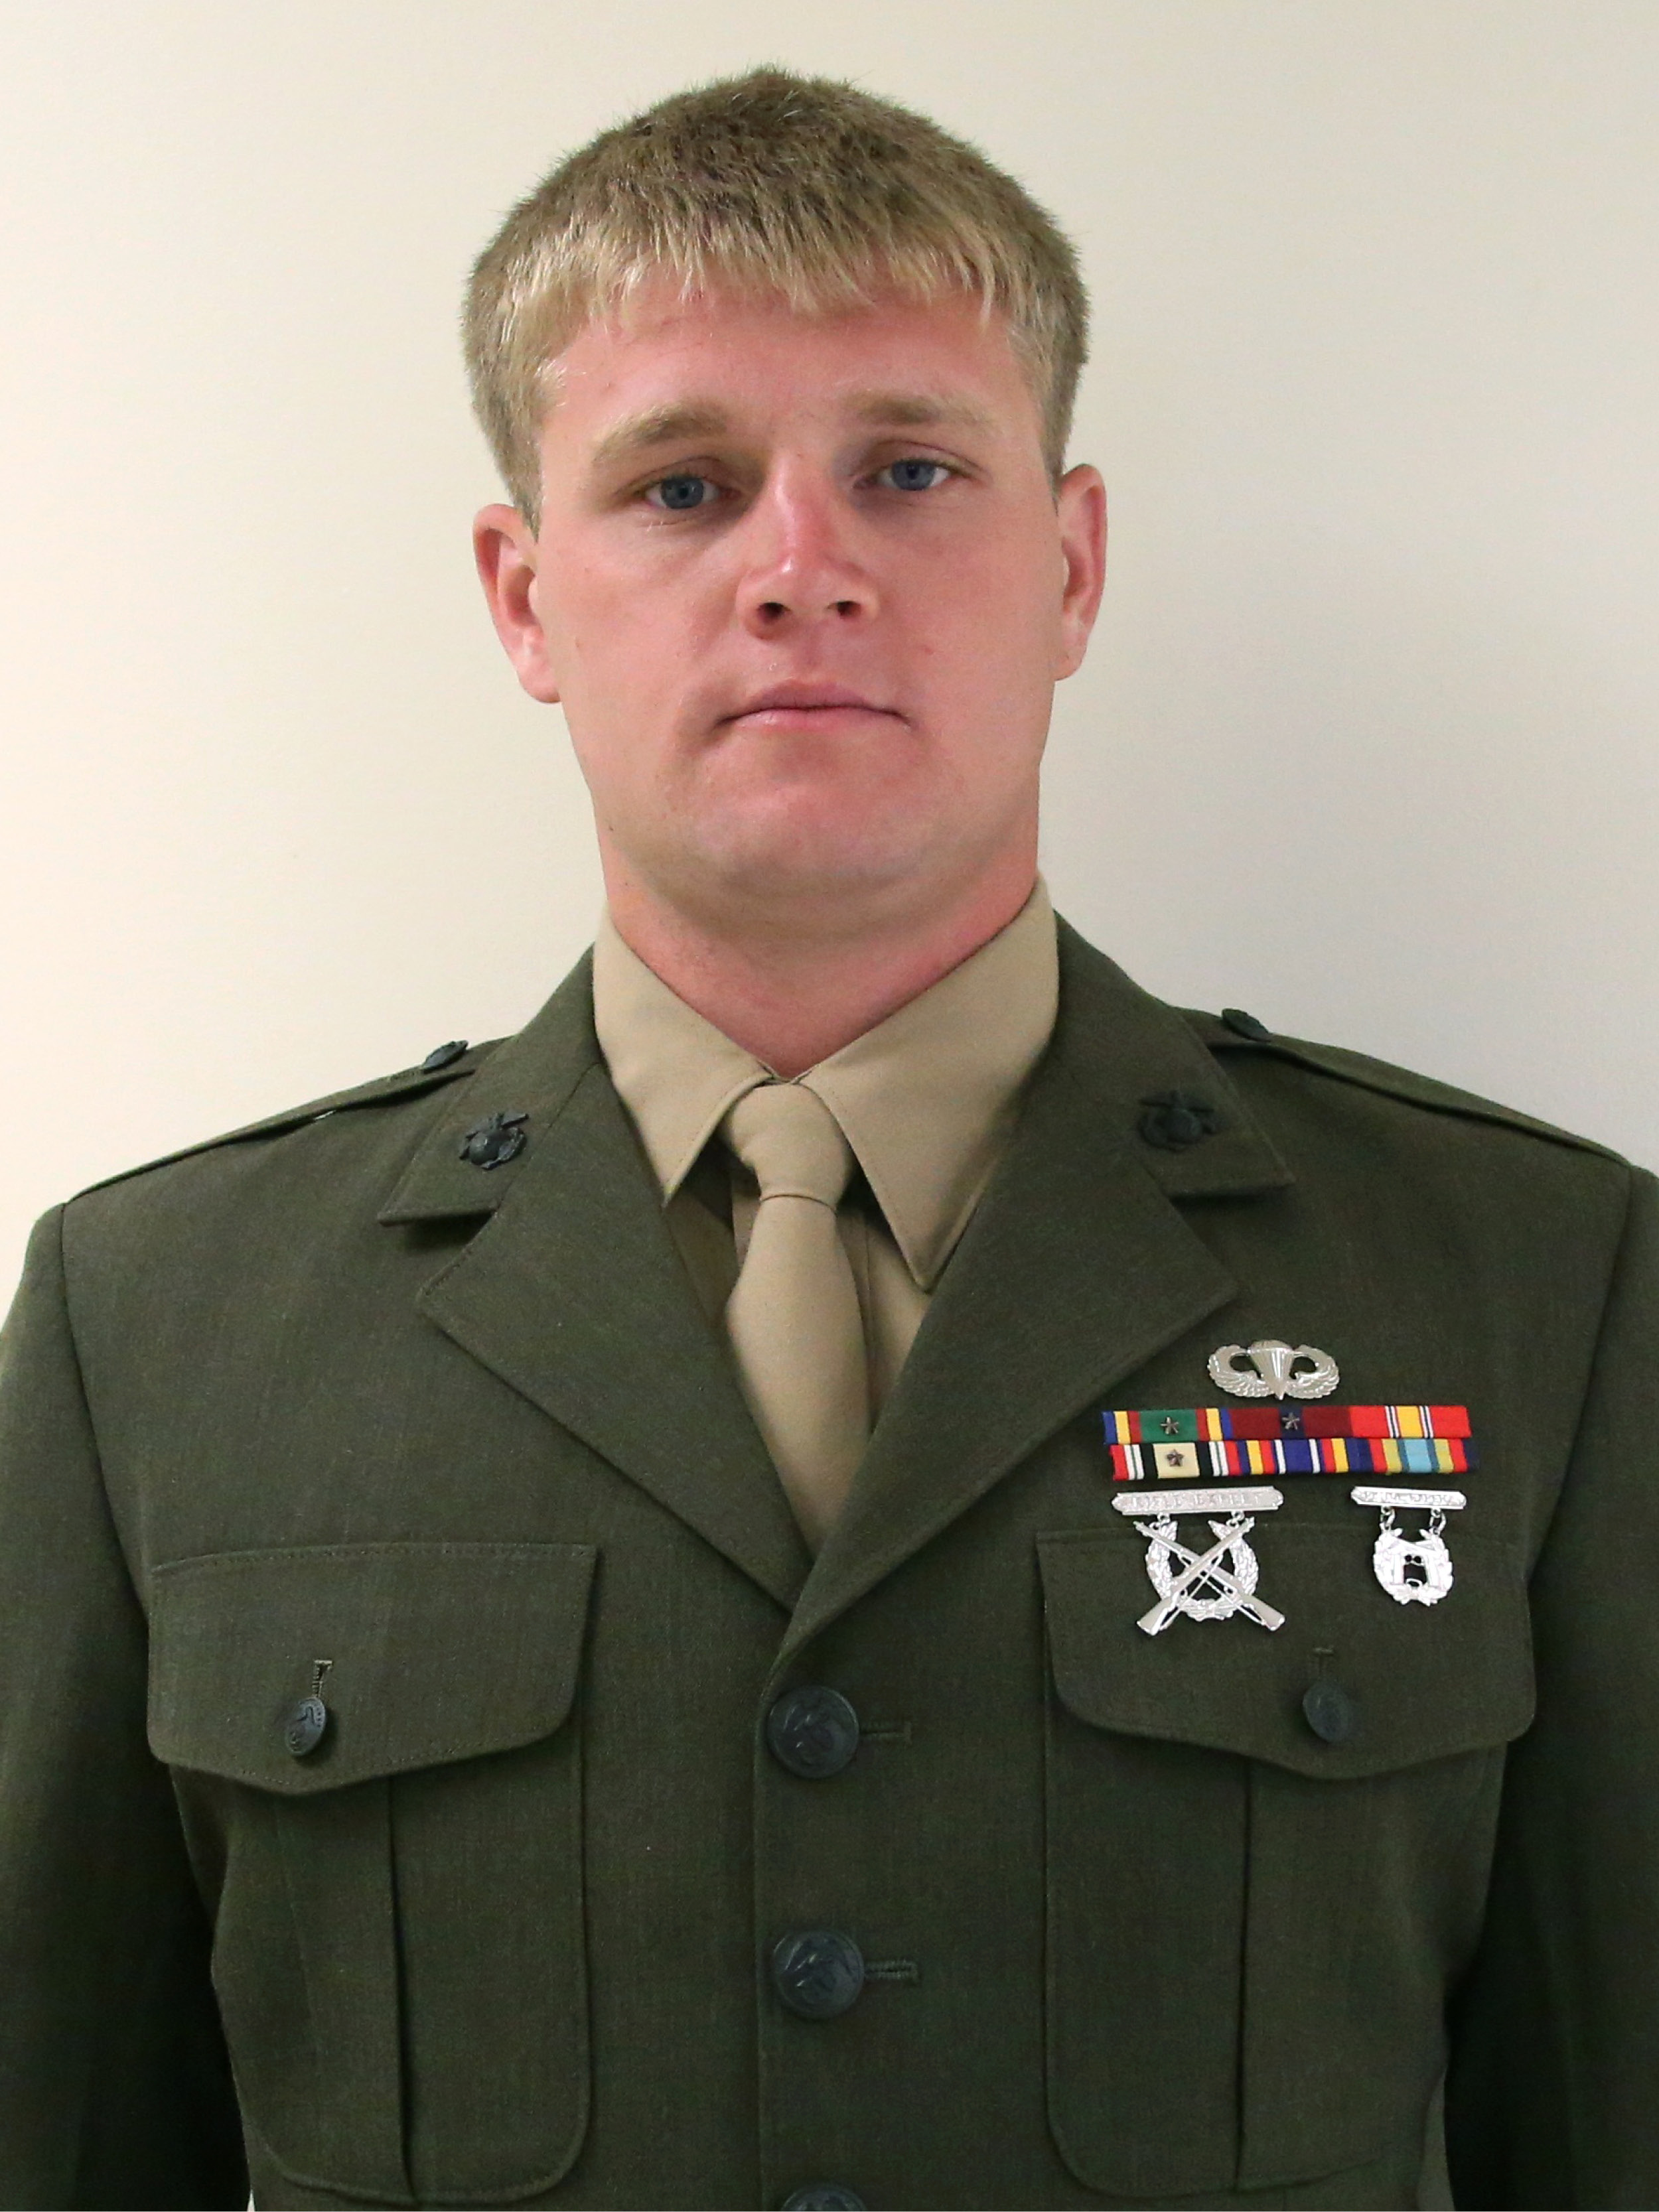 Staff Sgt. Kerry Kemp died when a U.S. Army UH-60 Blackhawk Helicopter crashed near Eglin, Florida, at approximately 8:30 p.m. March 10, 2015. Kemp, 27, a native of Port Washington, Wisconsin, served within U.S. Marine Corps Forces, Special Operational Command as a critical skills operator. His personal awards include the Navy and Marine Corps Achievement Medal with Valor, Combat Action Ribbon and Good Conduct Medal.